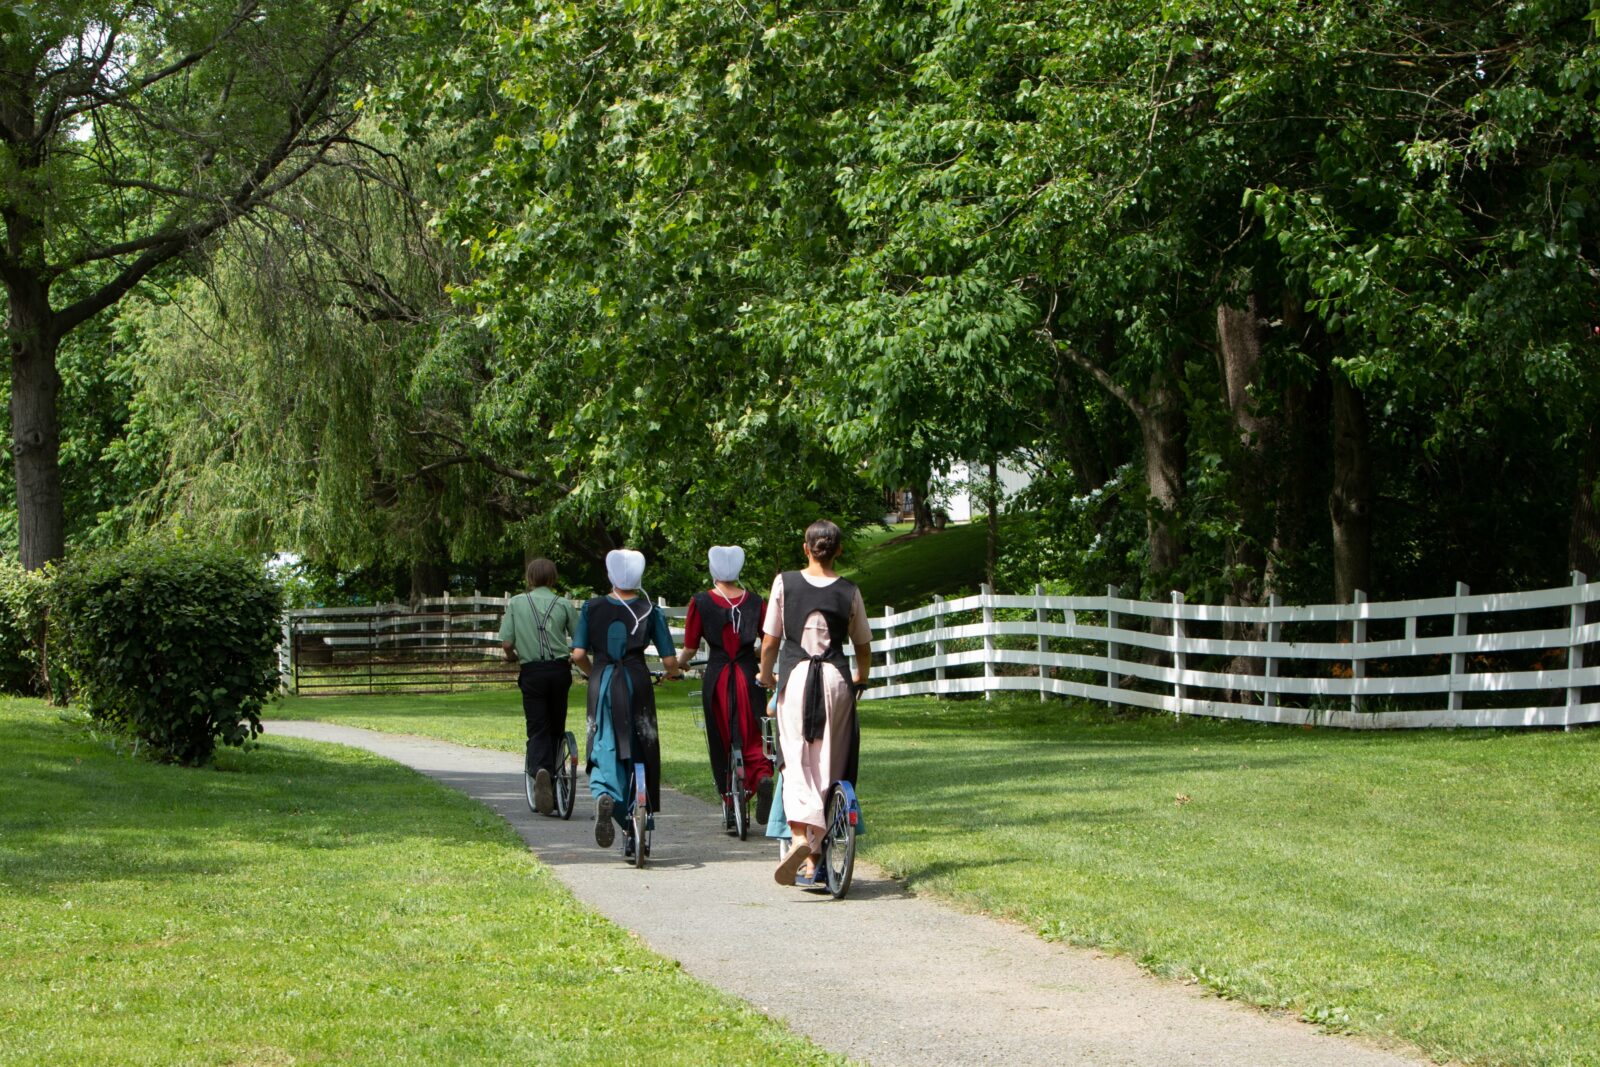 Amish Youth in Traditional Clothing on Scooters